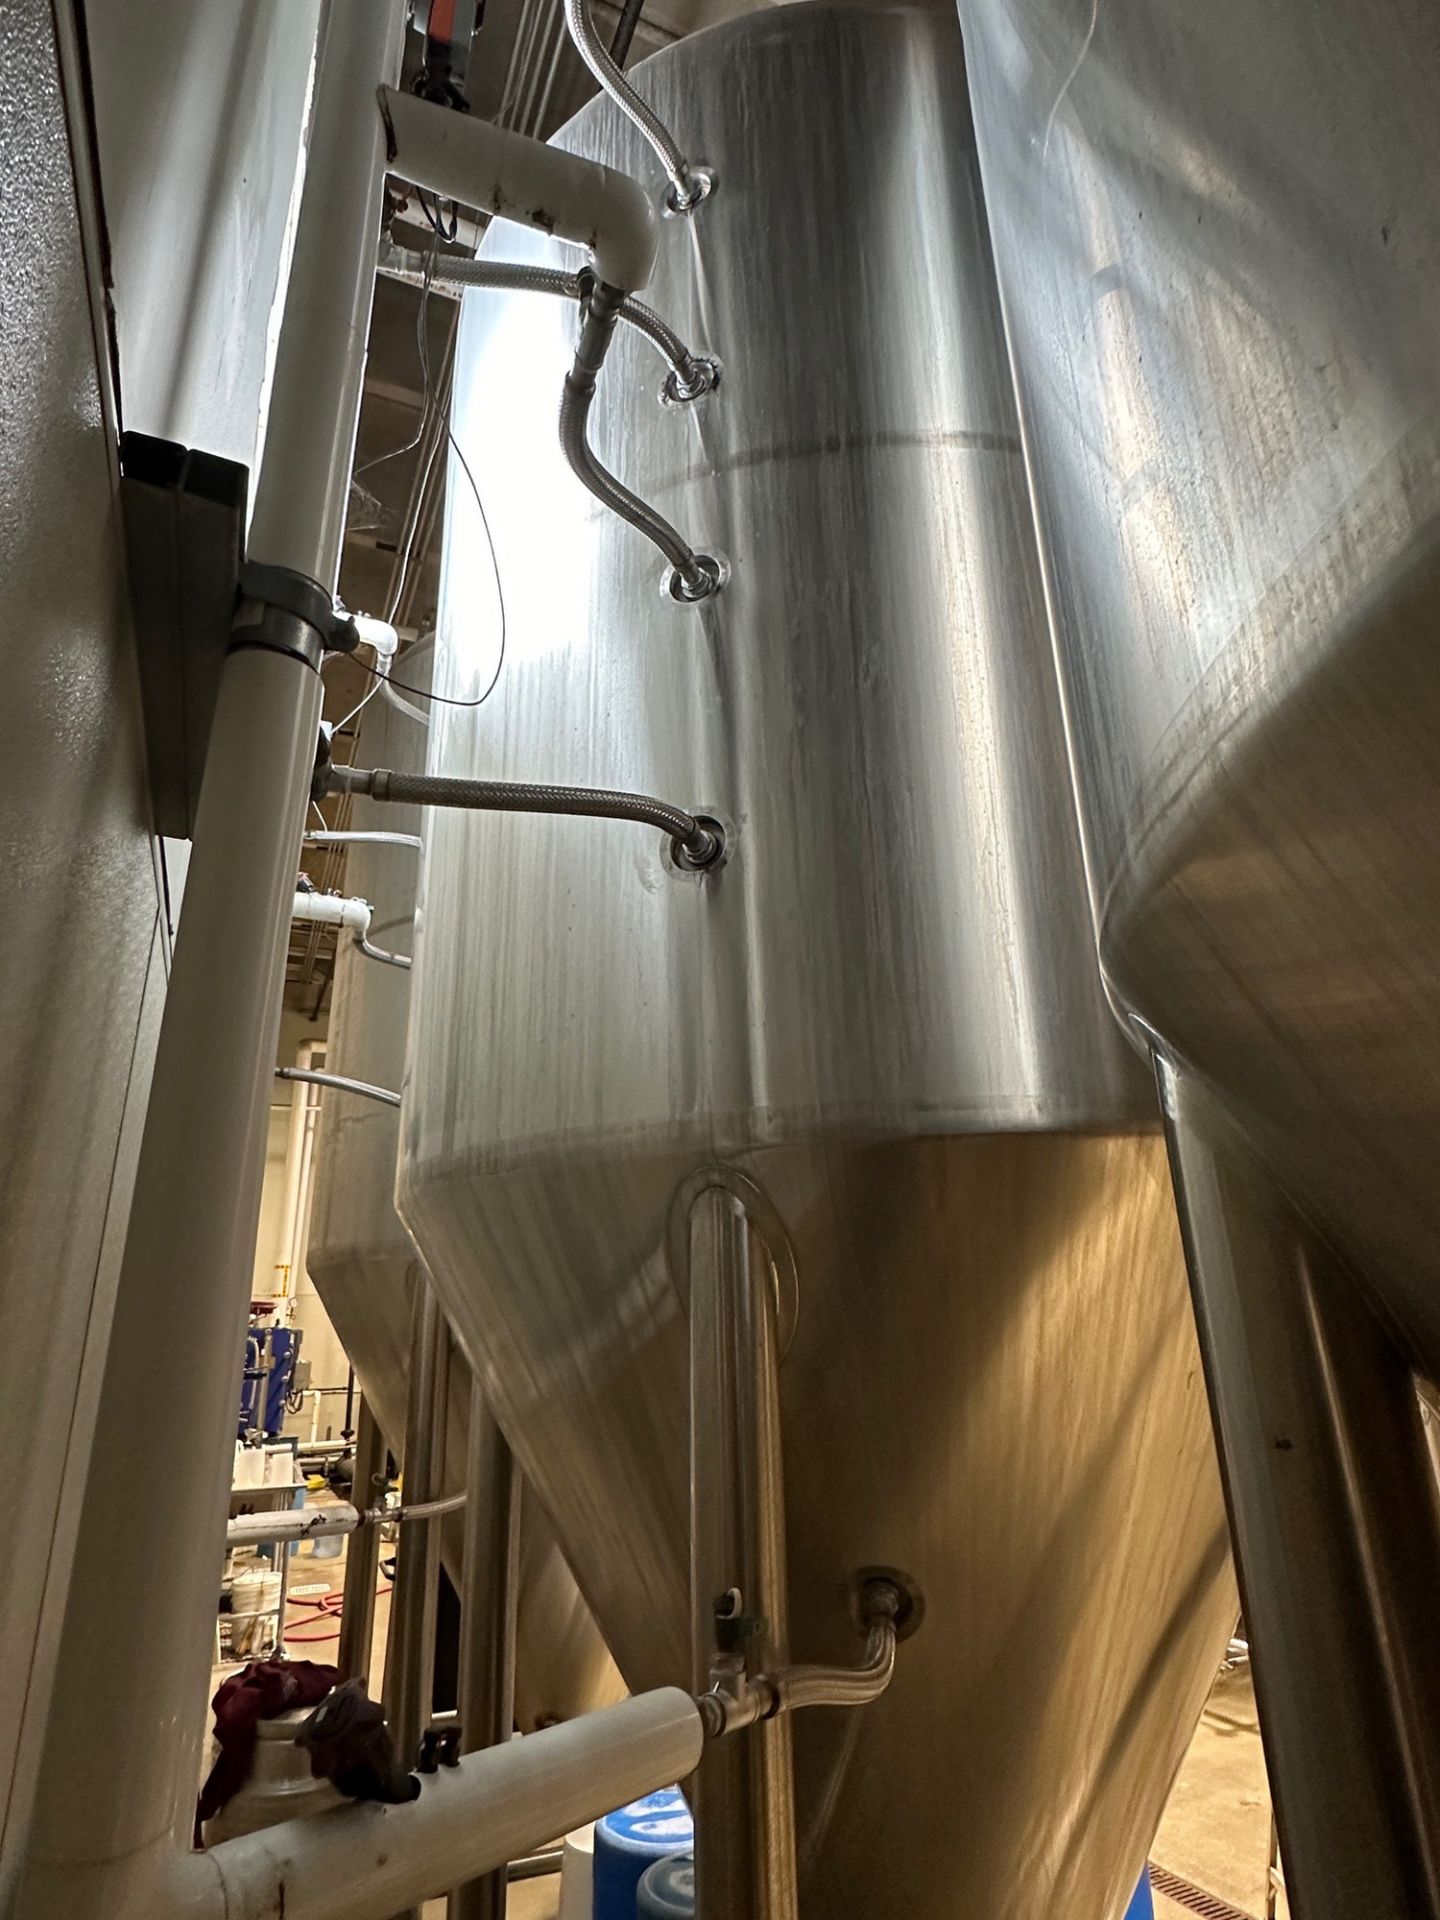 Premier Stainless 80 BBL Stainless Steel Fermentation Tank - Cone Bottom, Glycol Ja | Rig Fee $1850 - Image 2 of 4